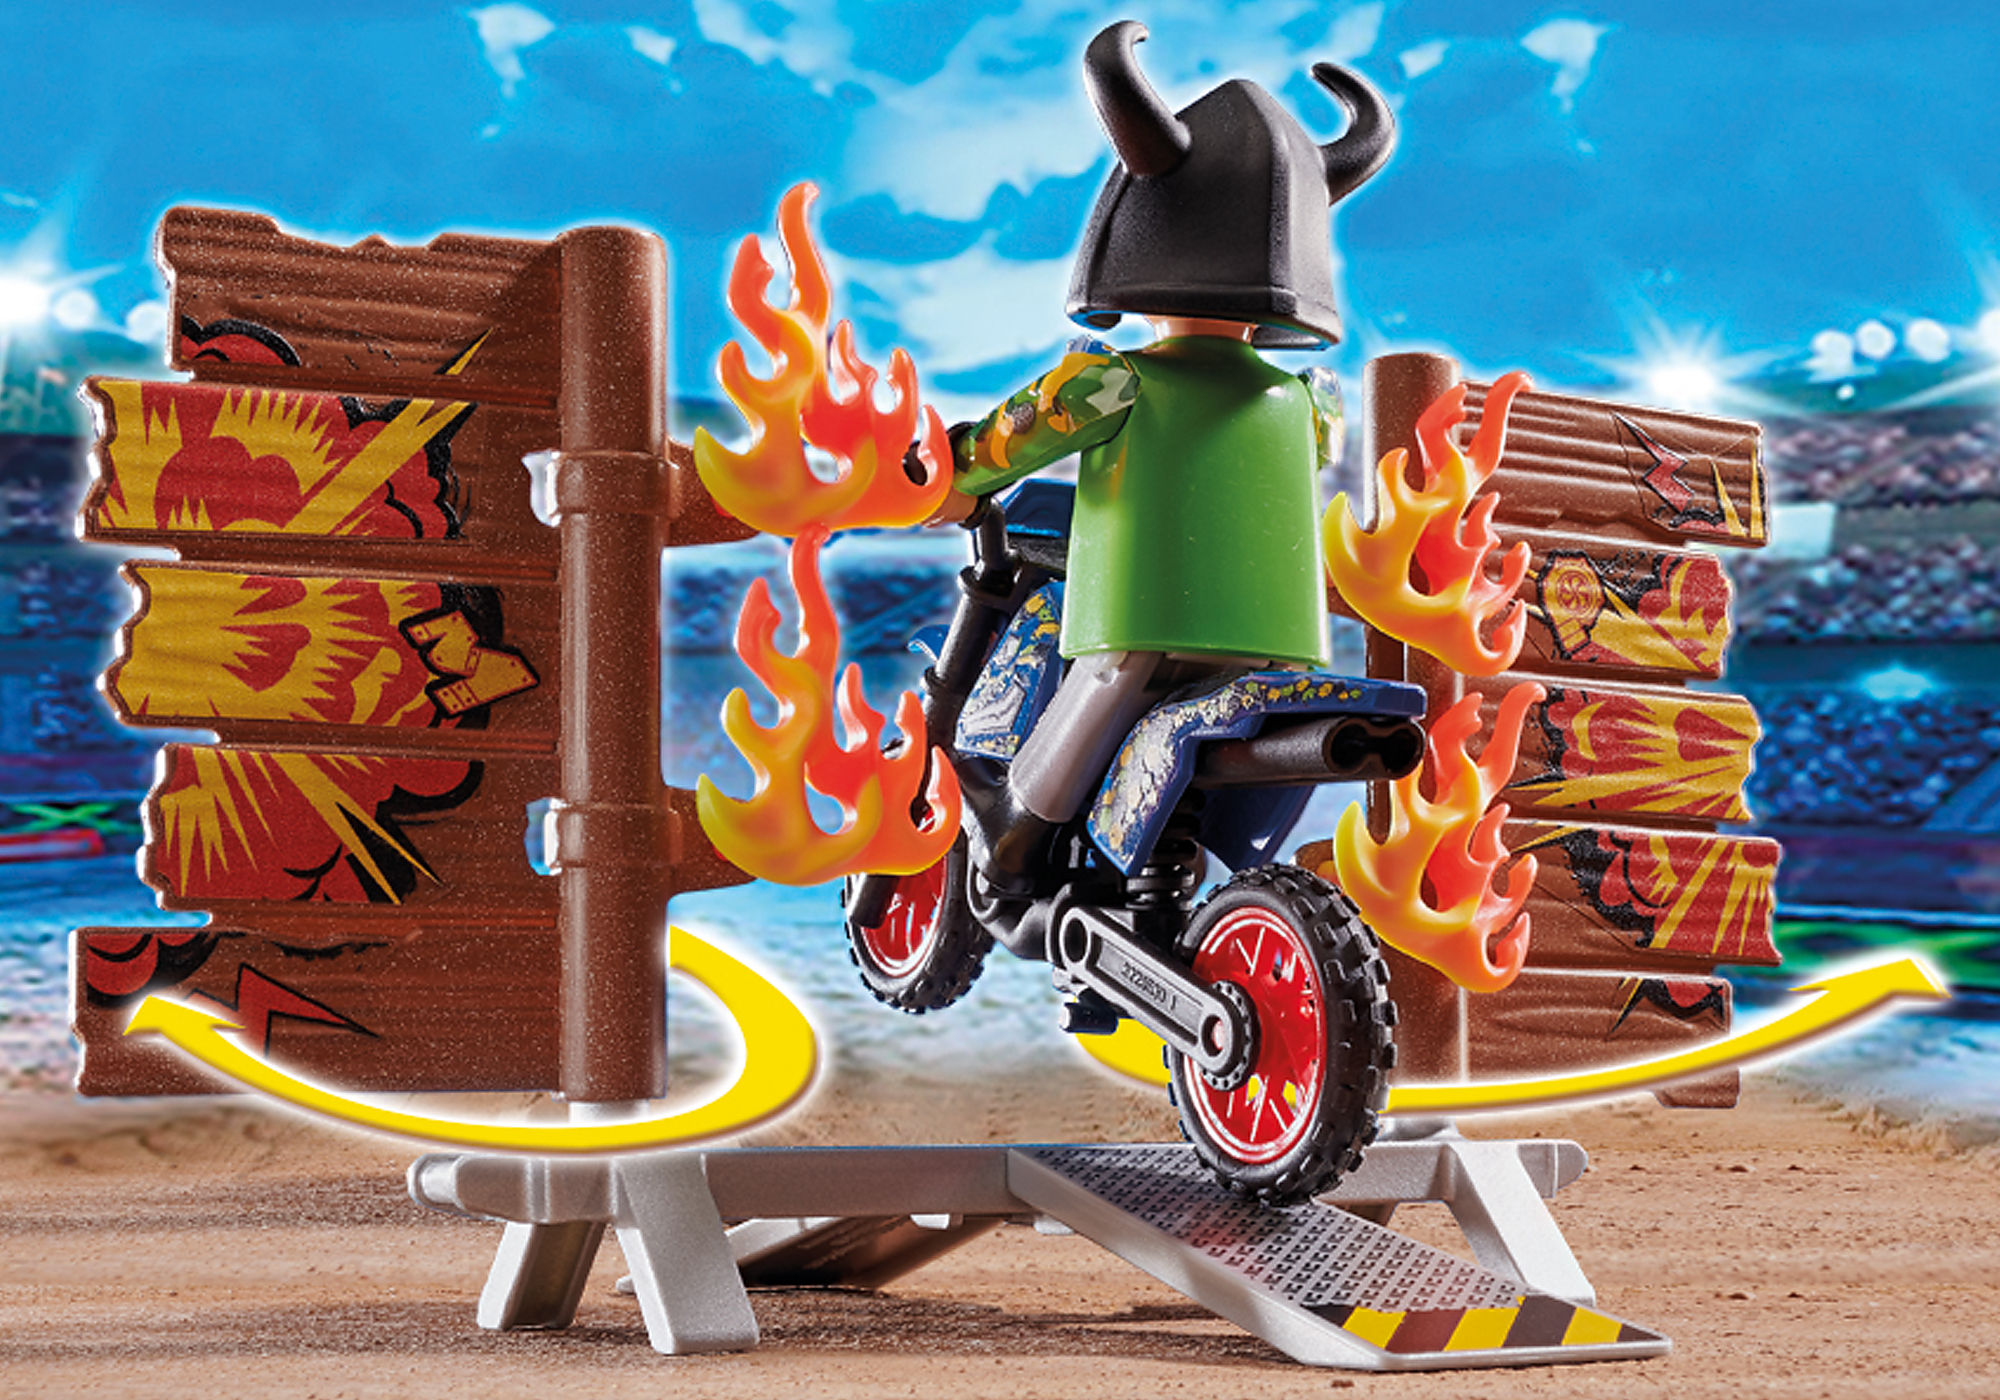 Stunt Show Motocross with Fiery Wall - 70553